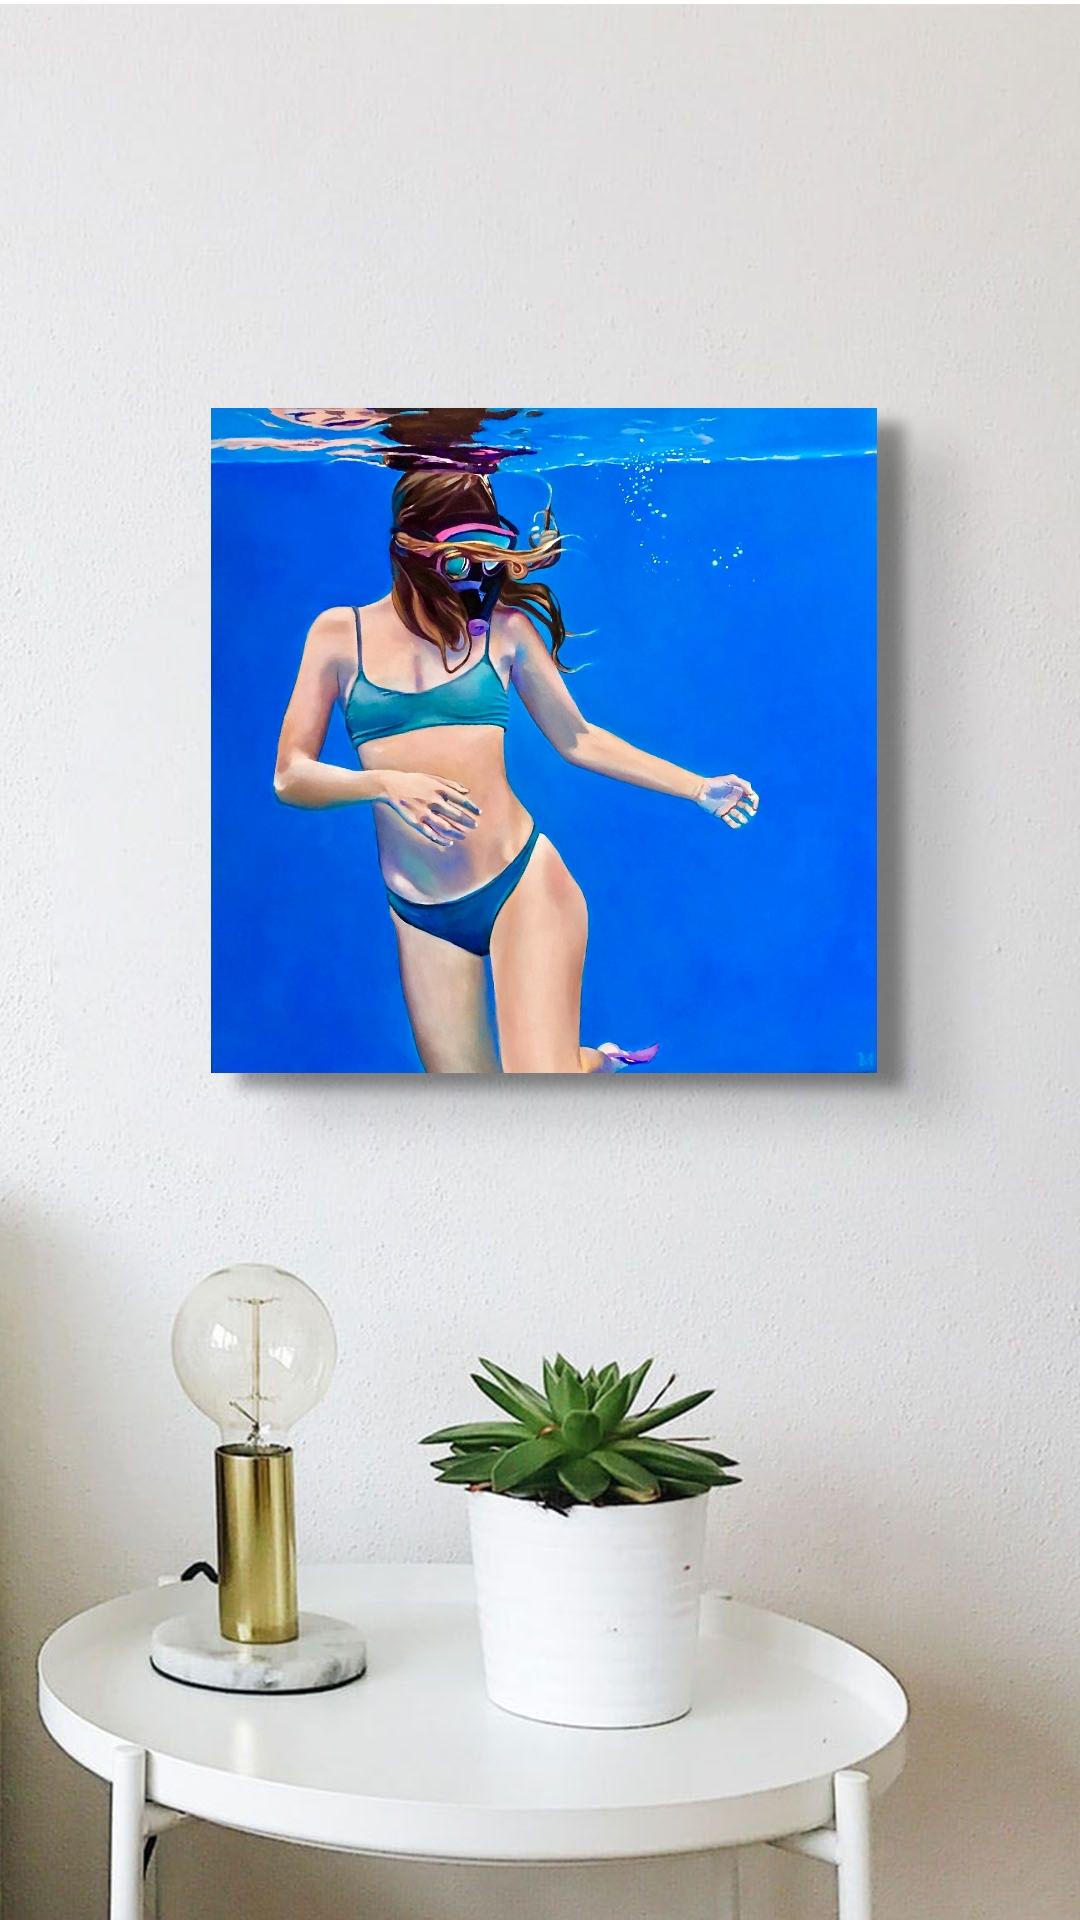 An original oil painting by Contemporary realist Megan Eisenberg. Made with high quality oil paints on 3/4